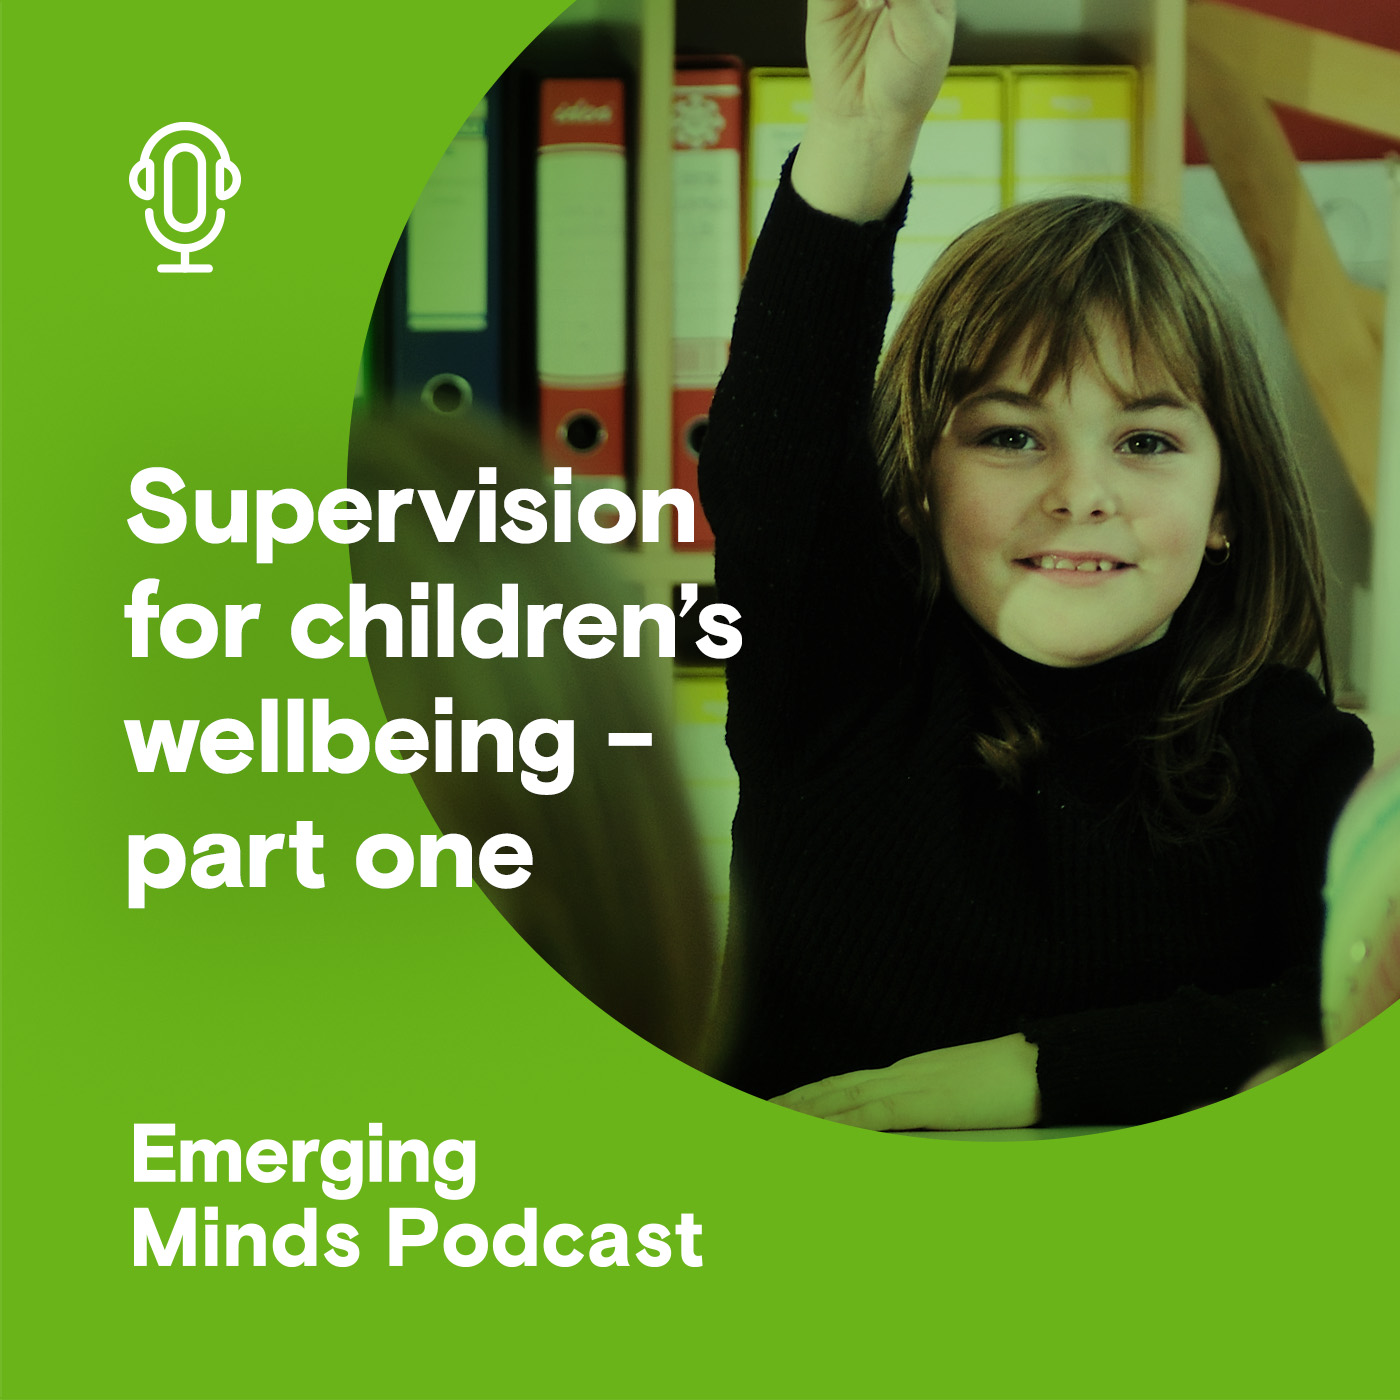 Supervision for children's wellbeing - part one